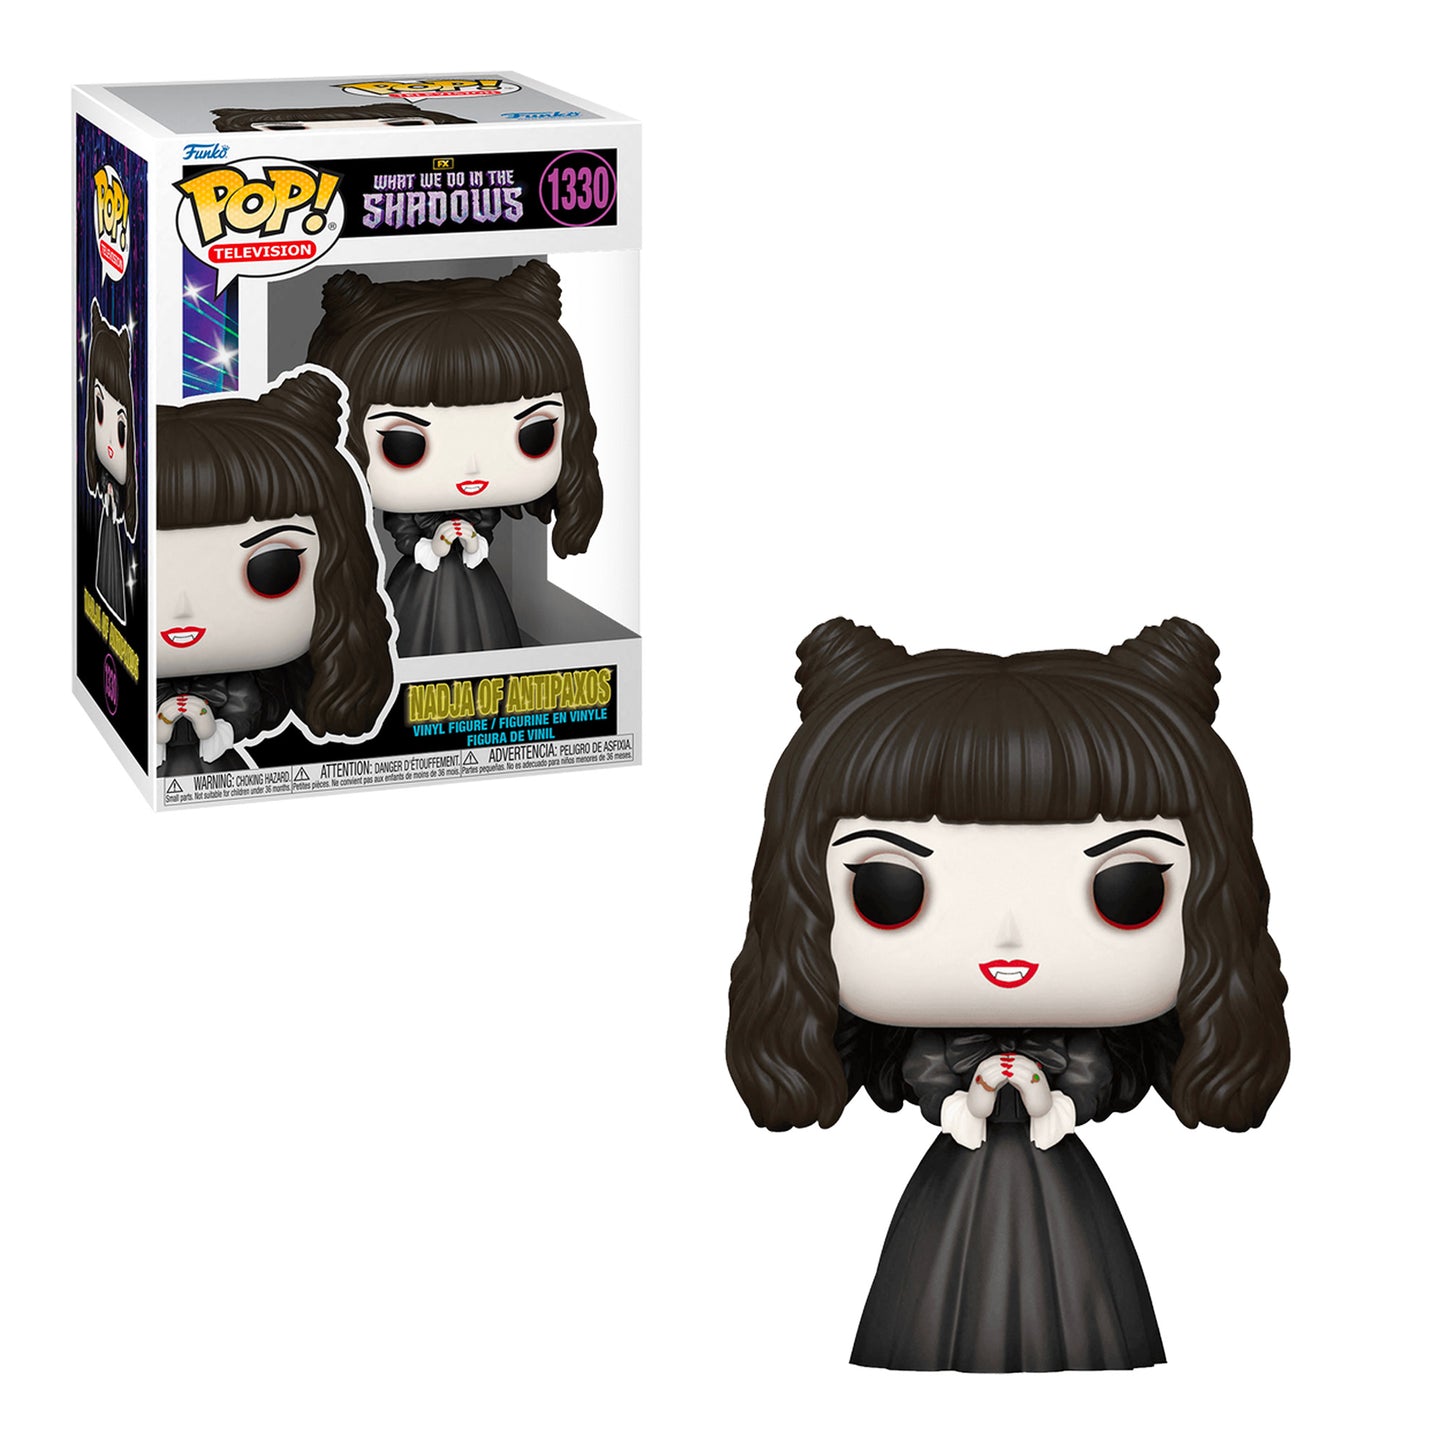 Funko Pop! Television: What We Do in the Shadows - Nadja of Antipaxos #1330